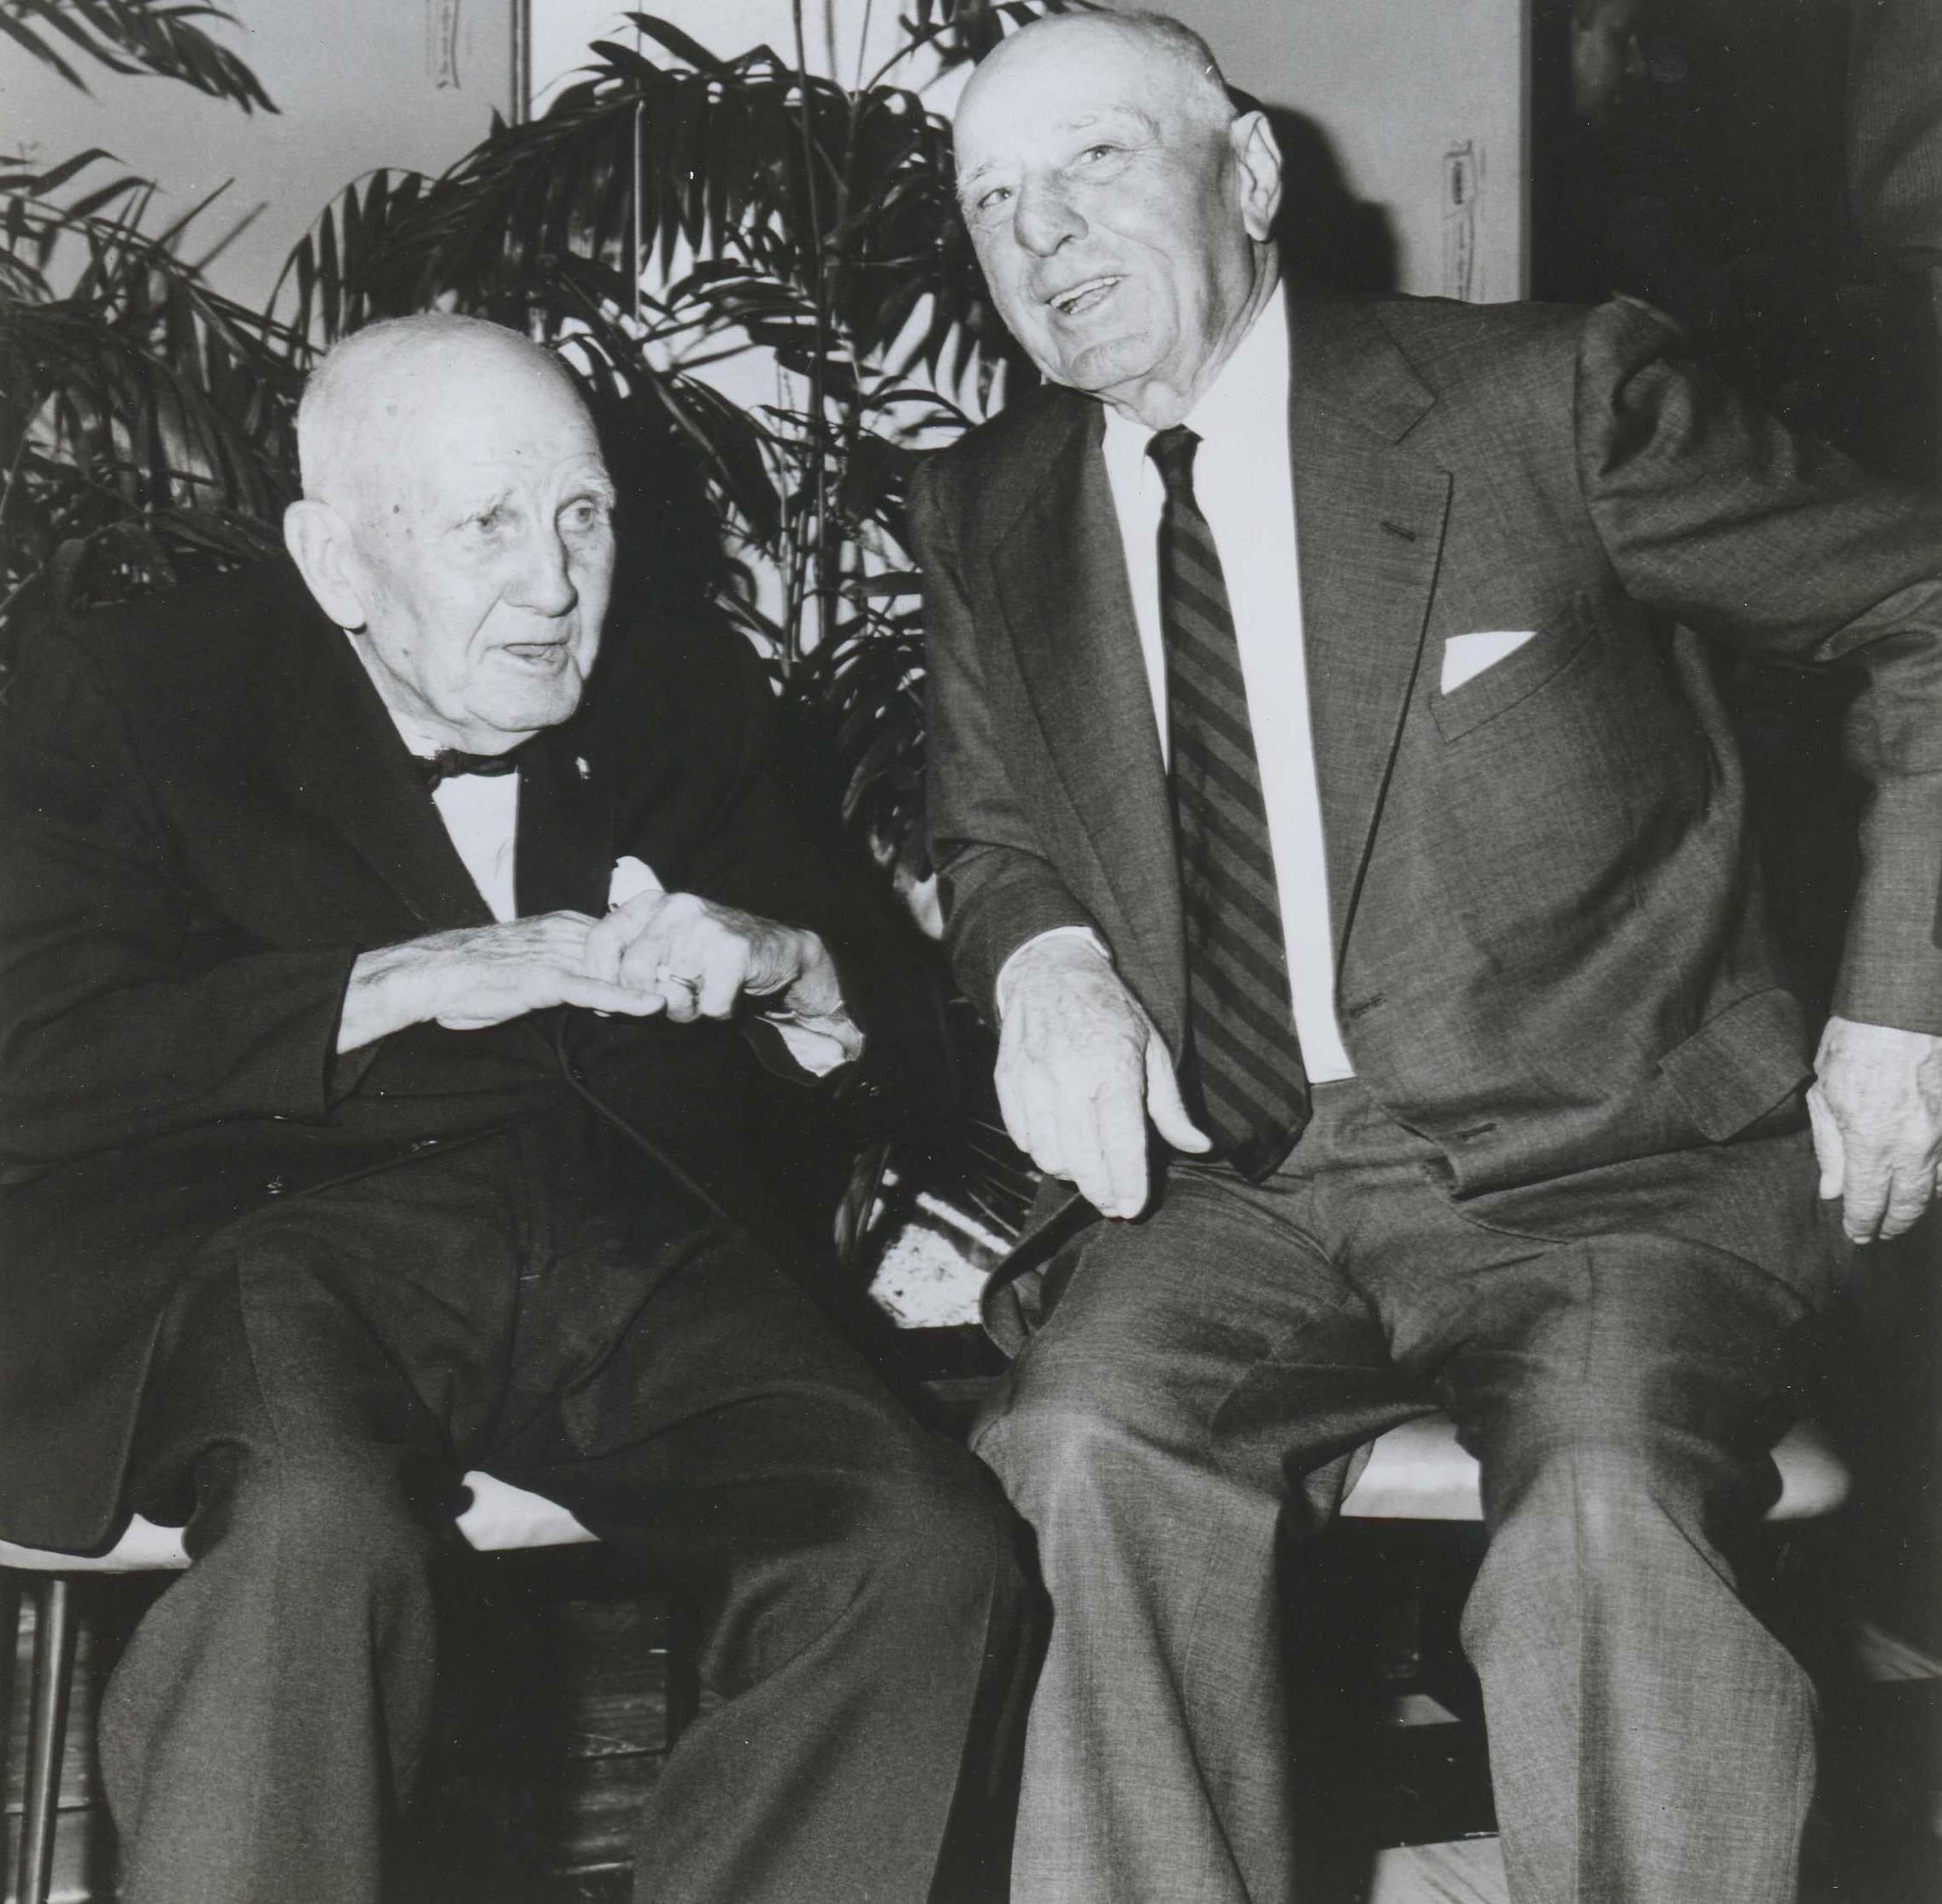 James "Sunny Jim" Fitzsimmons, left, and Max Hirsch at Saratoga, 1964 (Museum Collection)